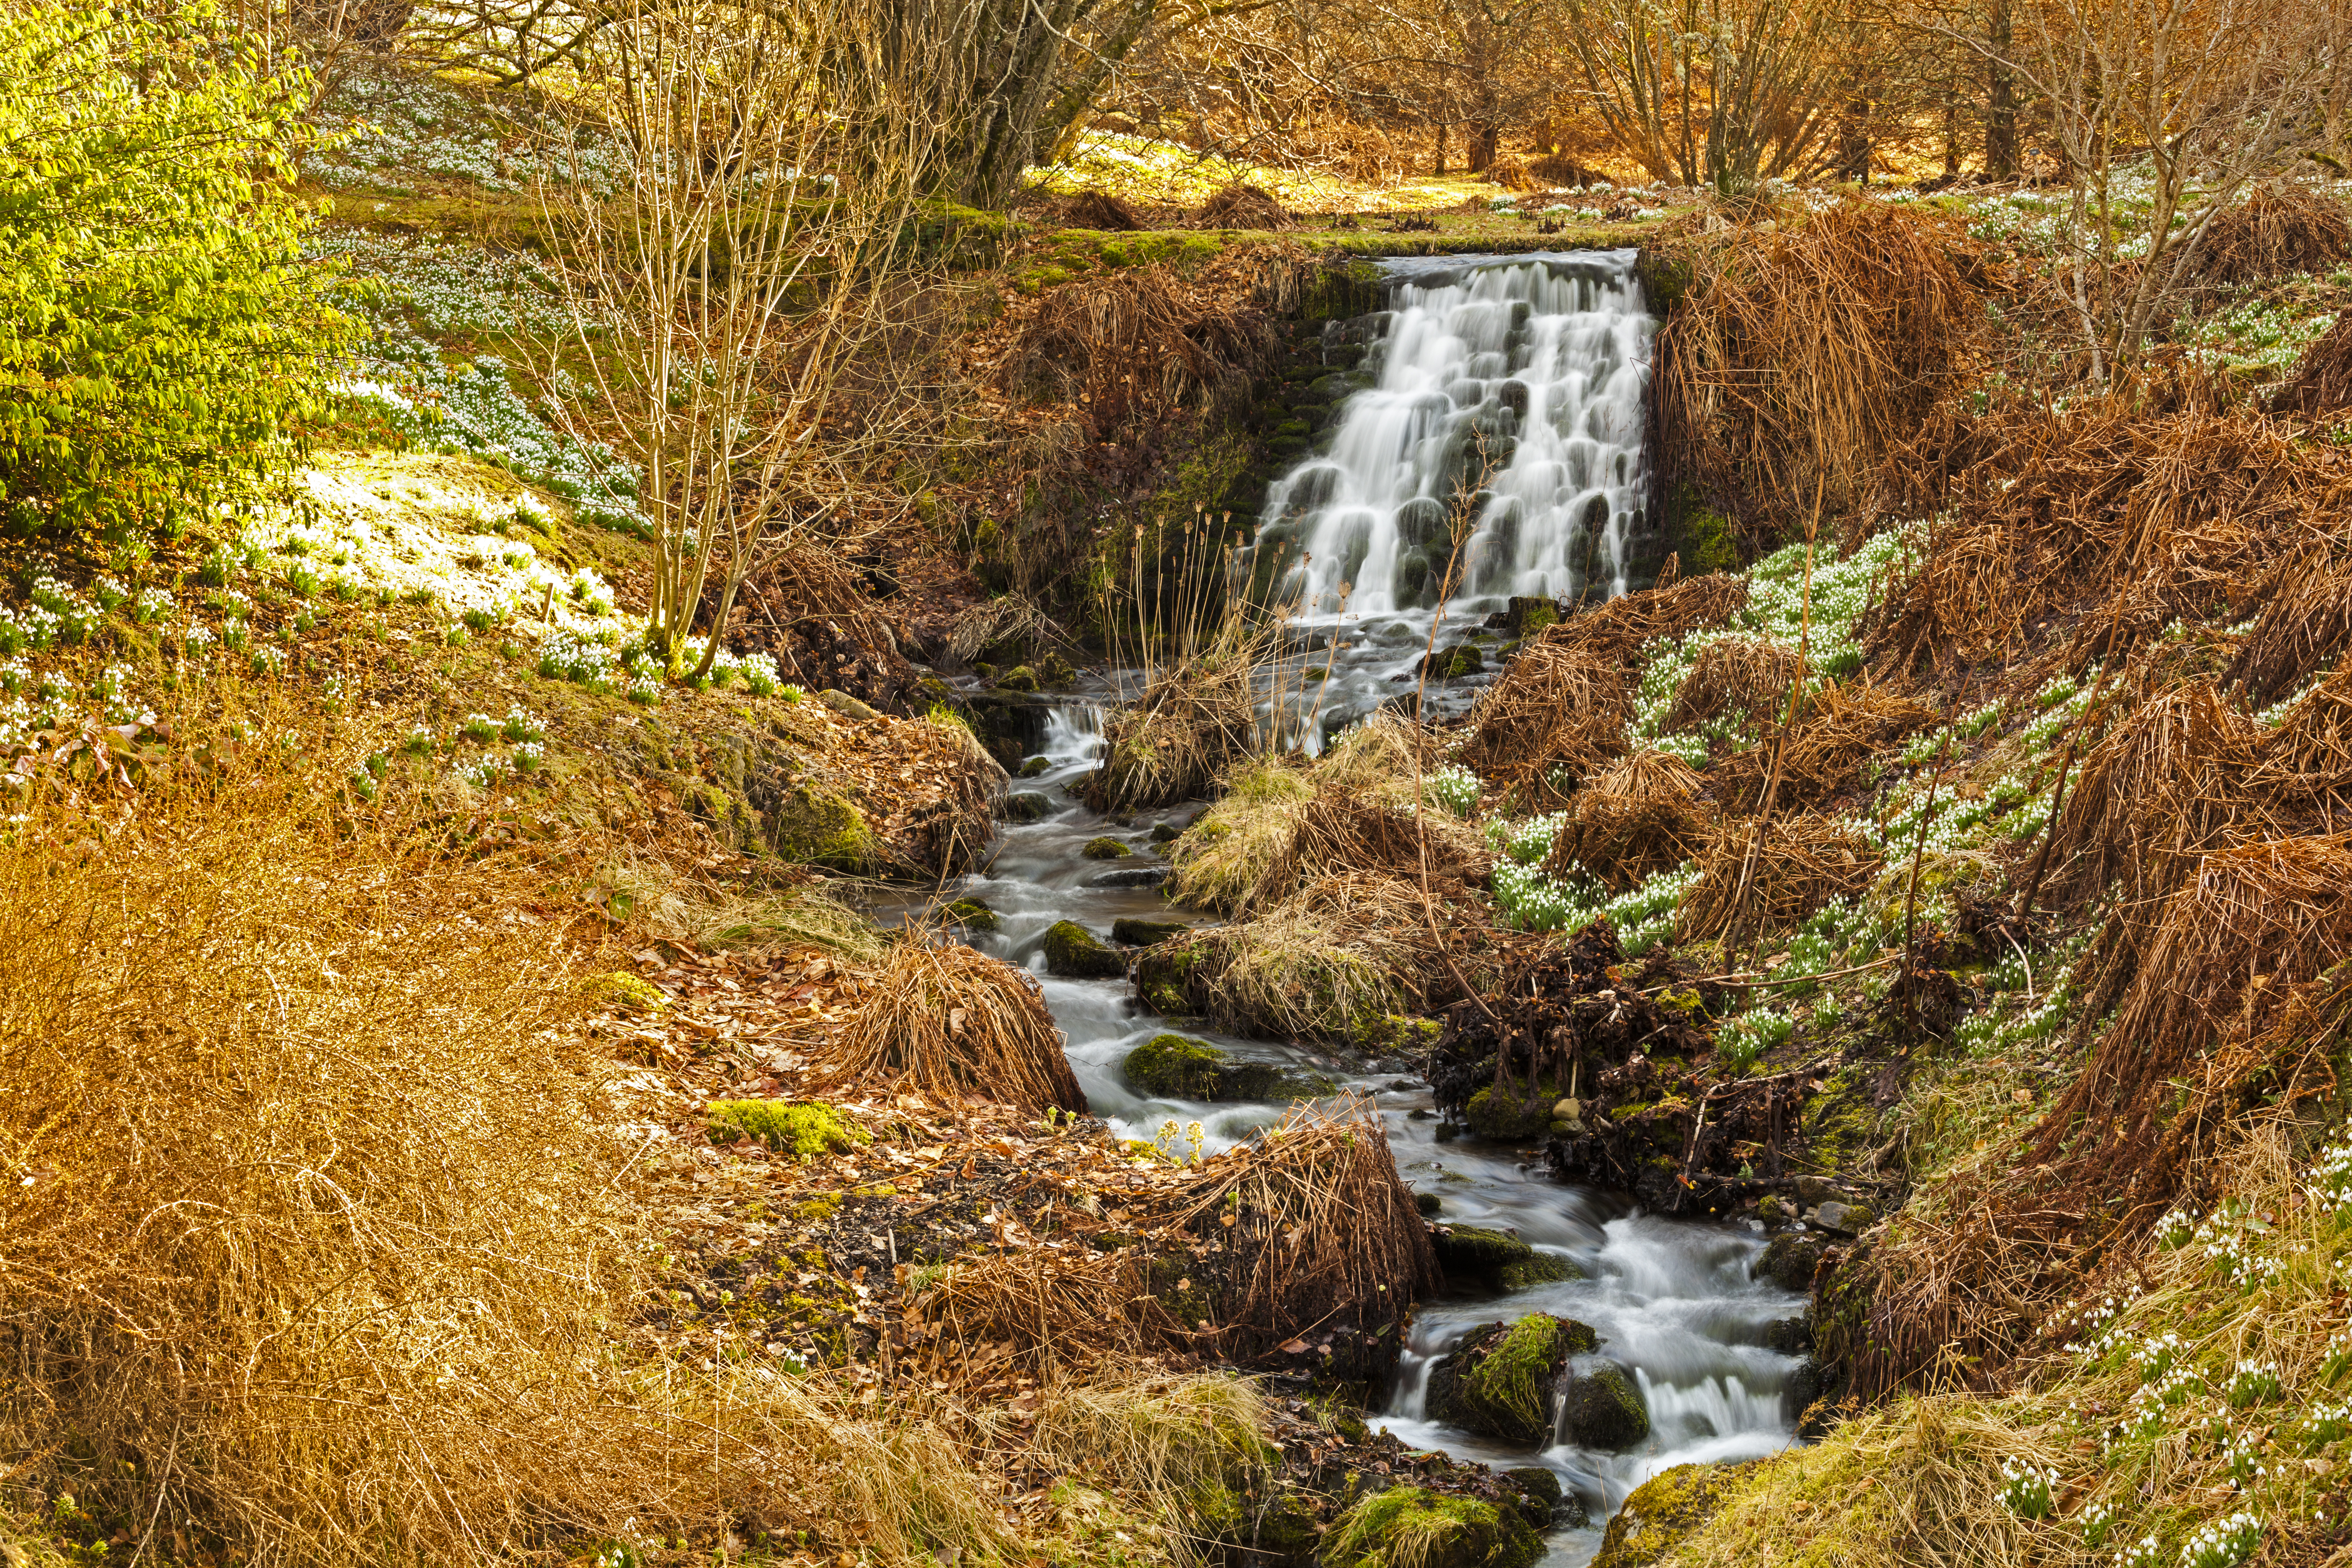 A waterfall and snowdrops at Dawyck botanic garden